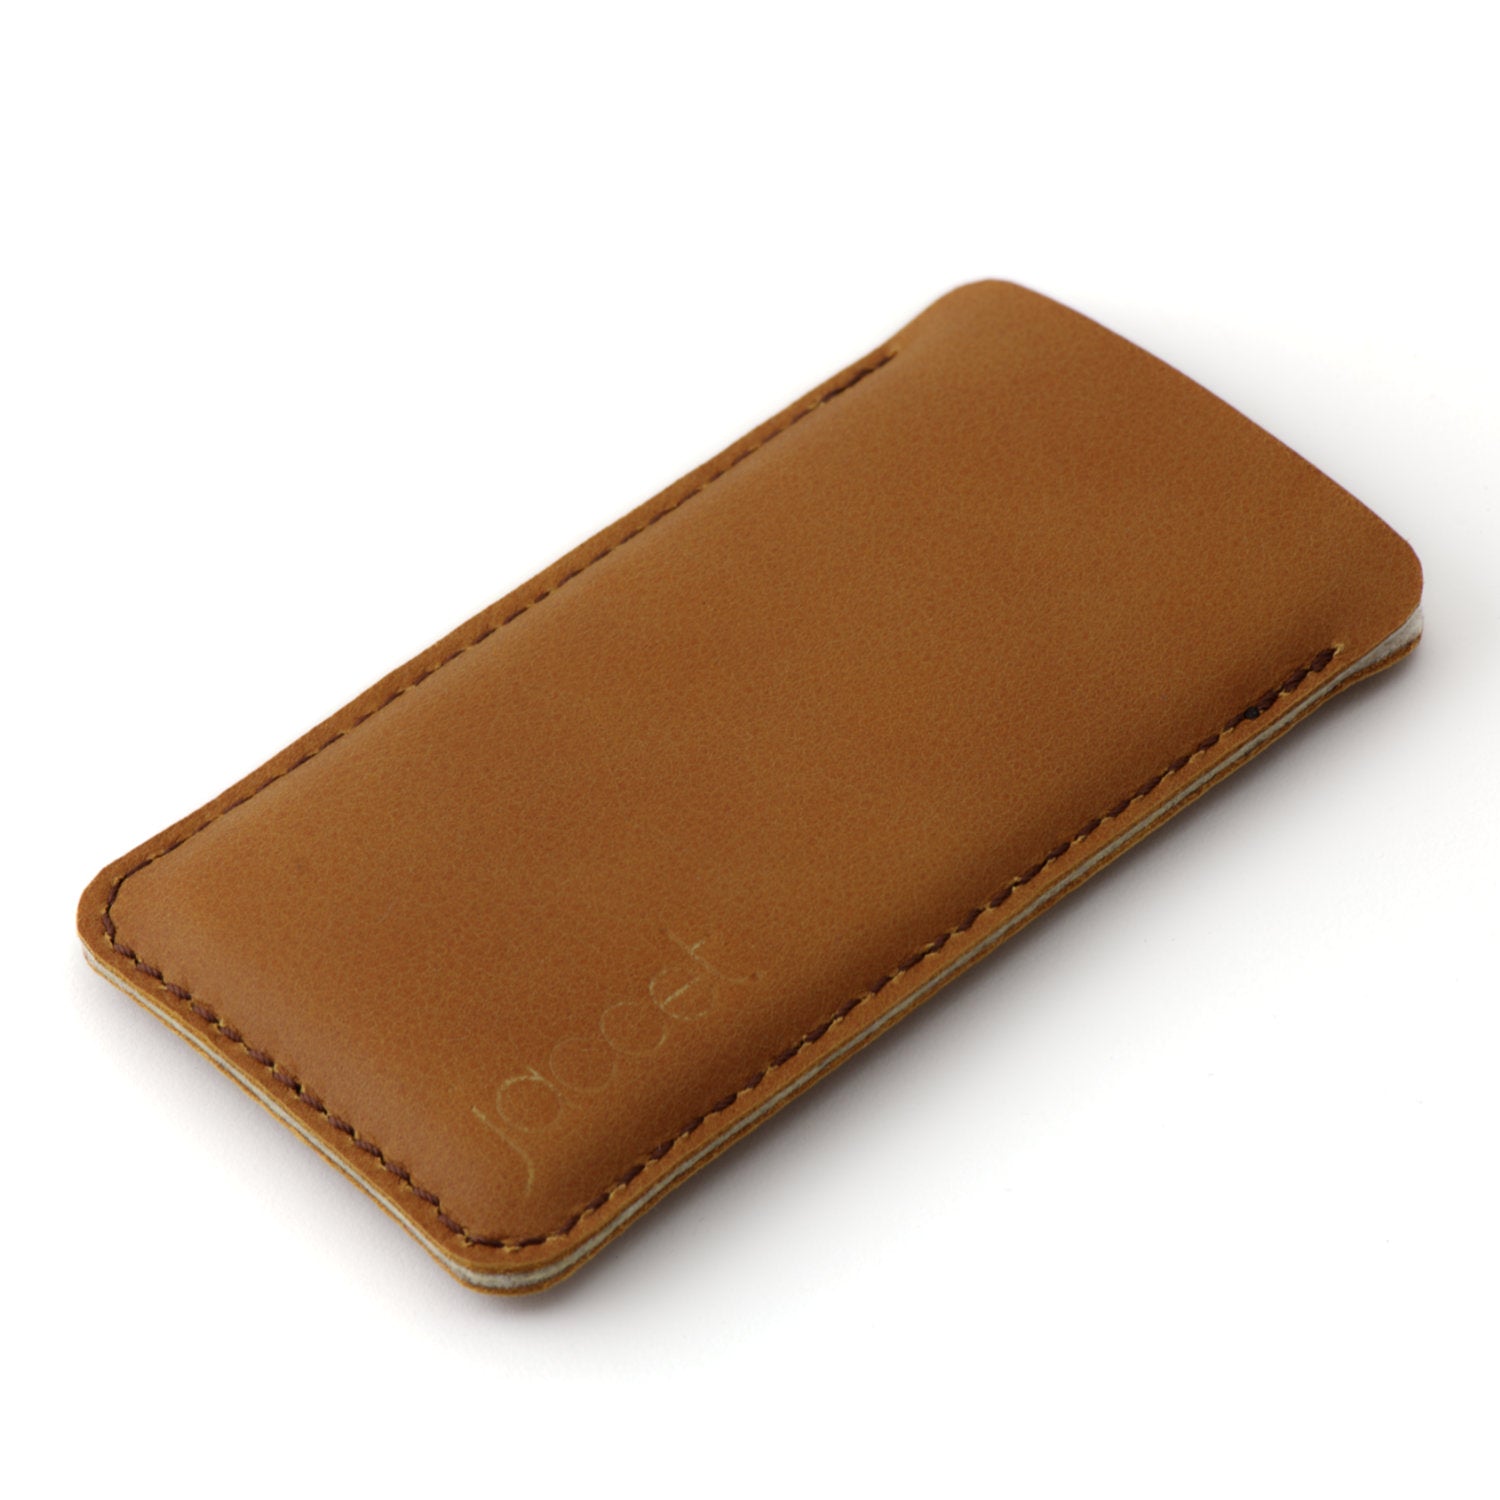 JACCET leather iPhone sleeve - Cognac color leather with brown wool felt - 100% Handmade